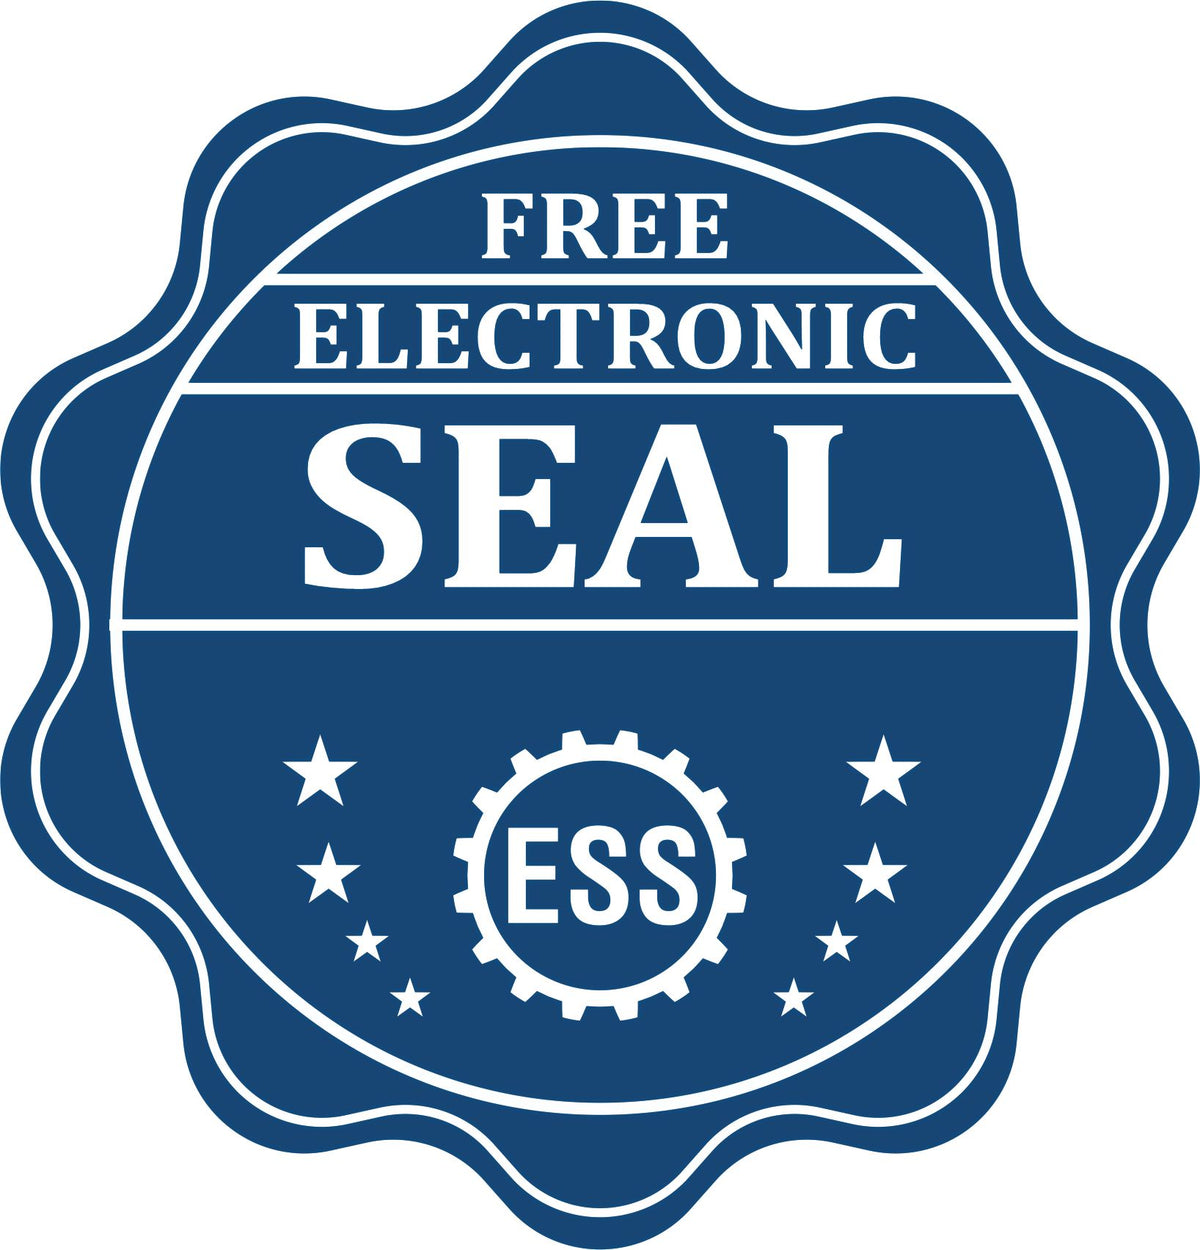 A badge showing a free electronic seal for the West Virginia Desk Architect Embossing Seal with stars and the ESS gear on the emblem.